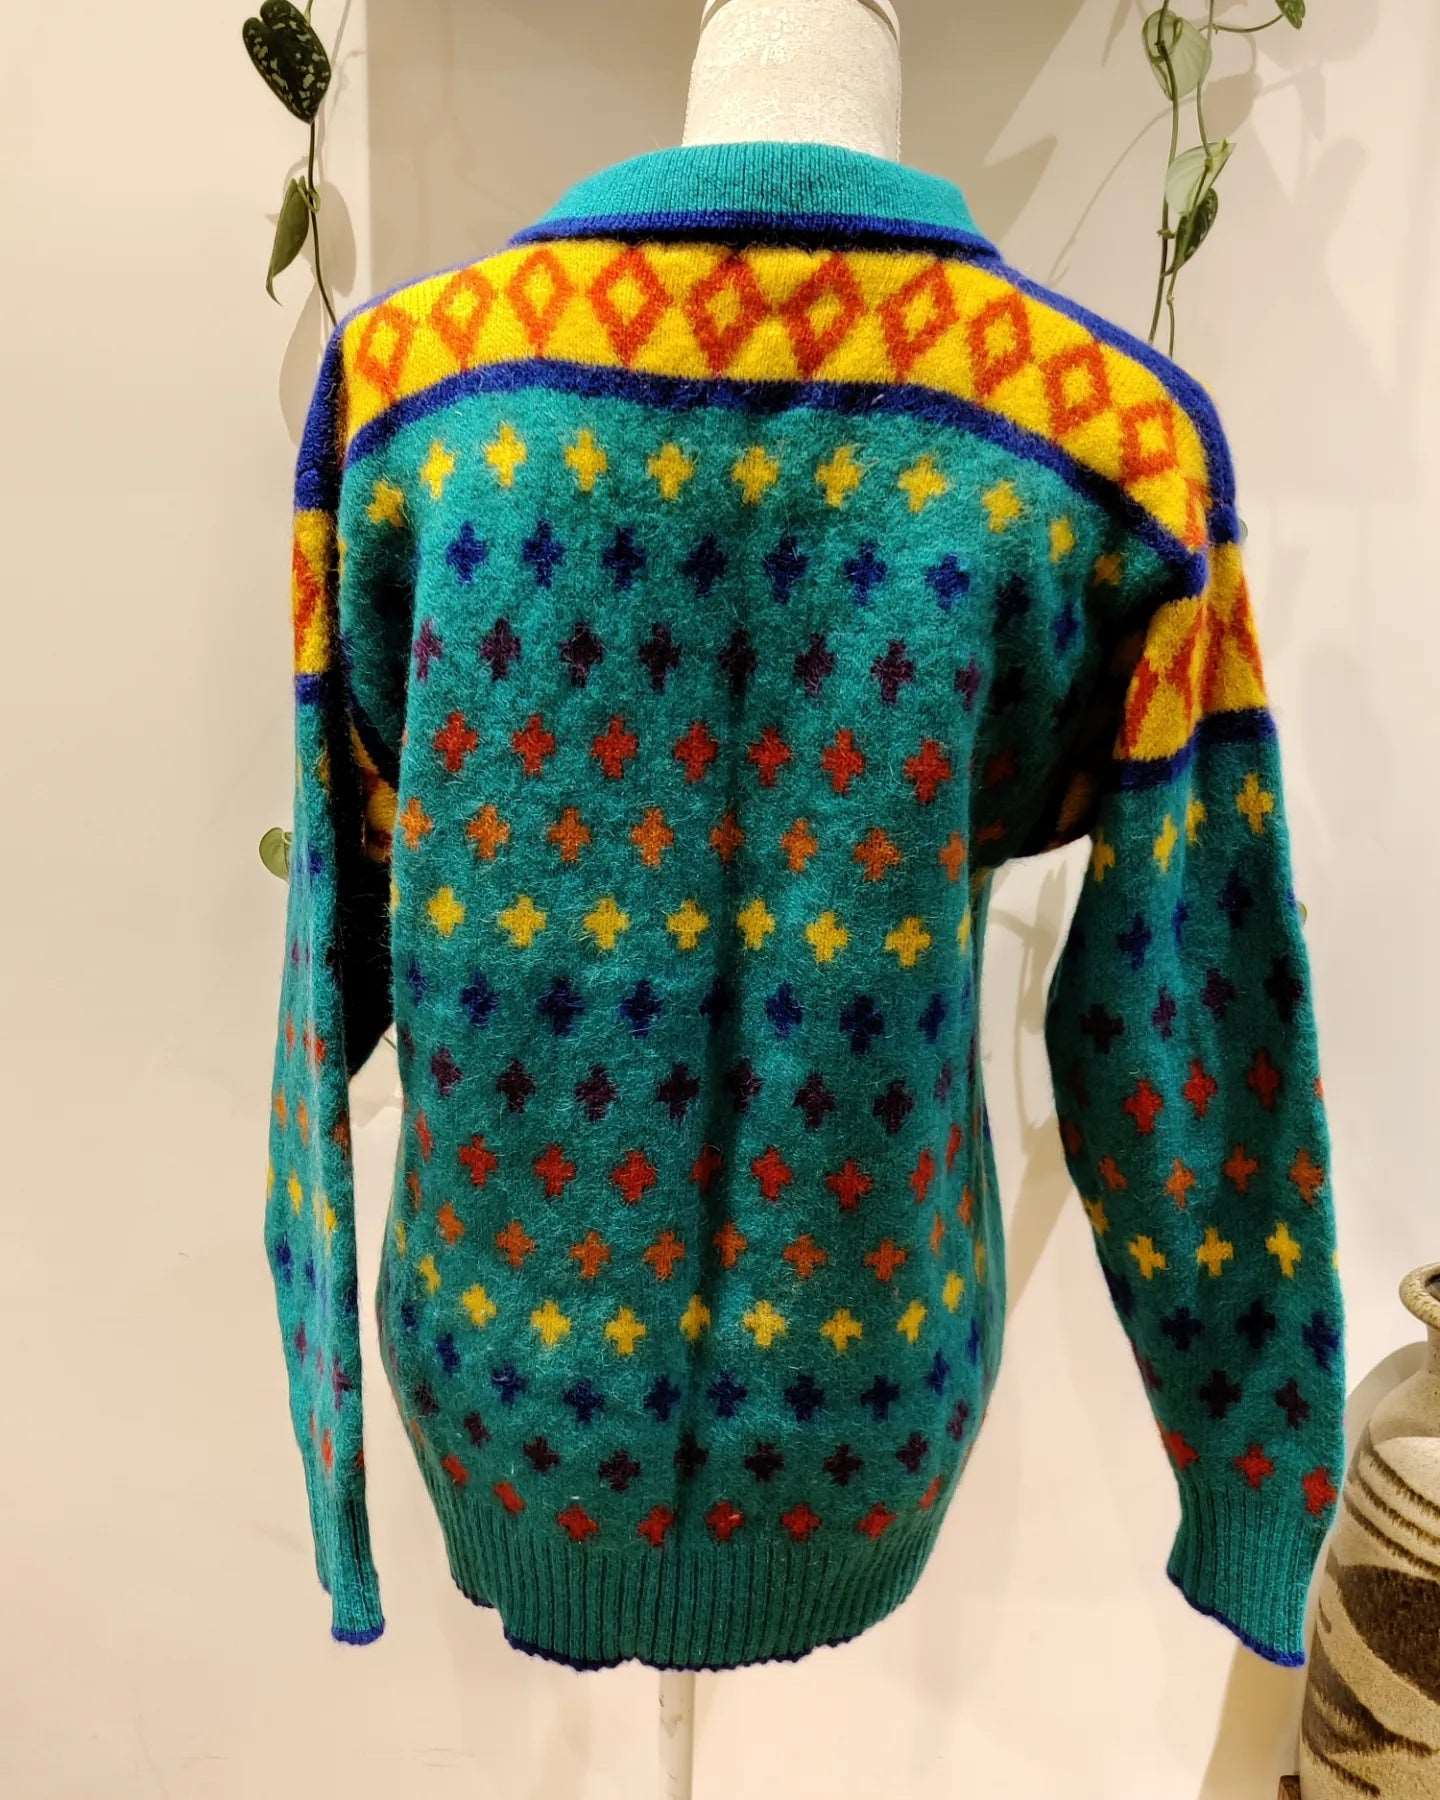 1980s jumper for sale.